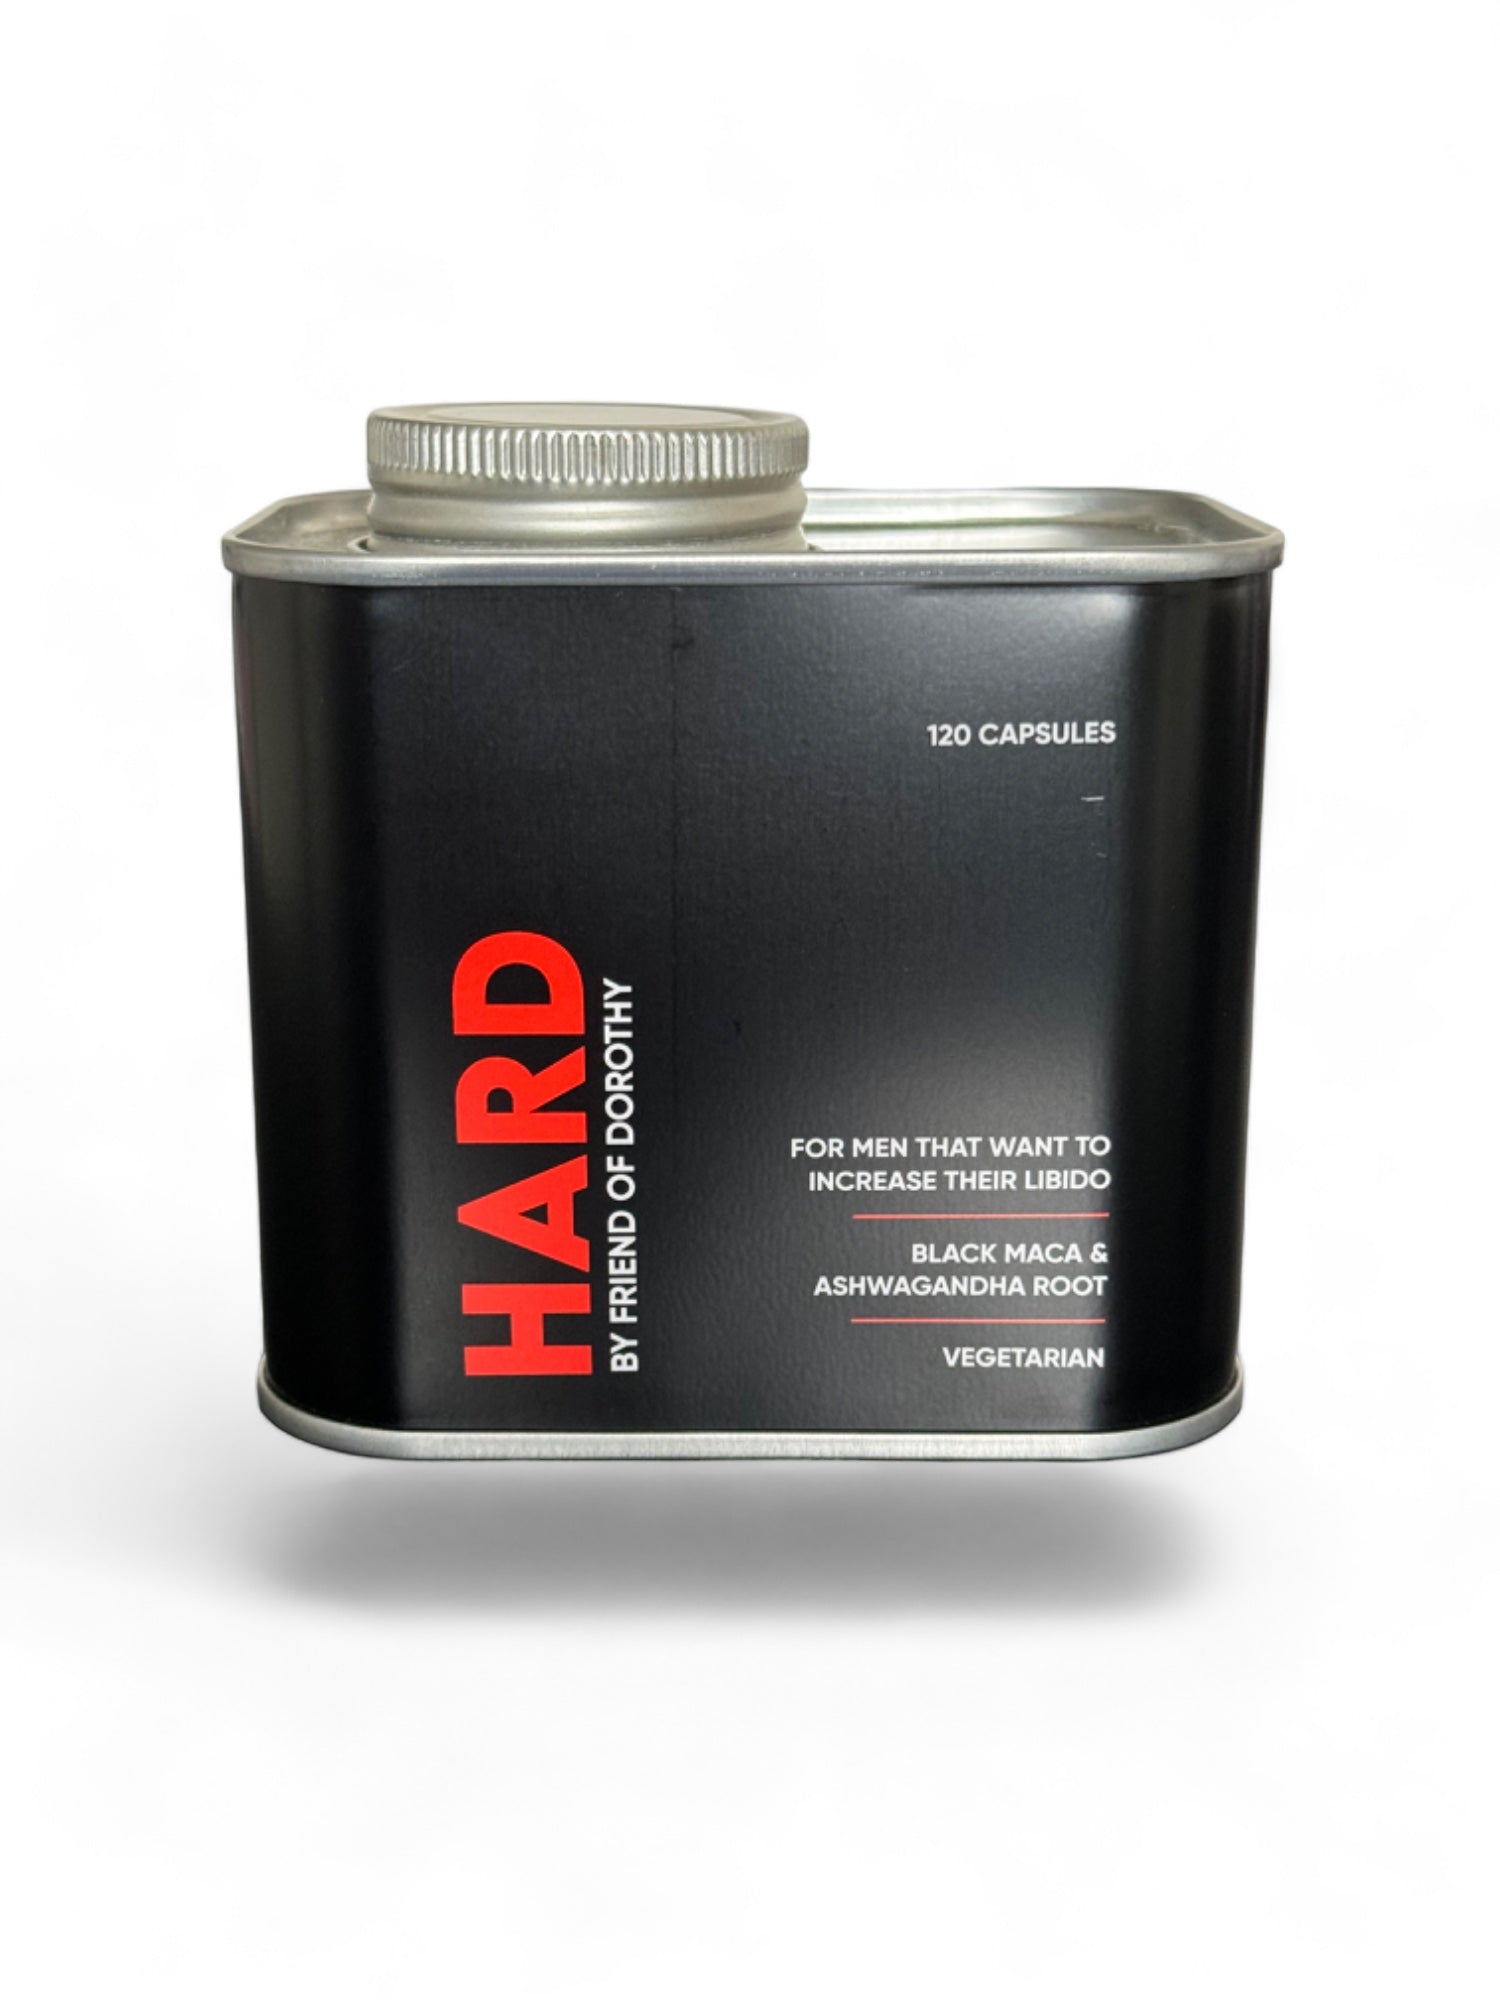 HARD - boost your libido, get hard & stay hard (2 months supply)